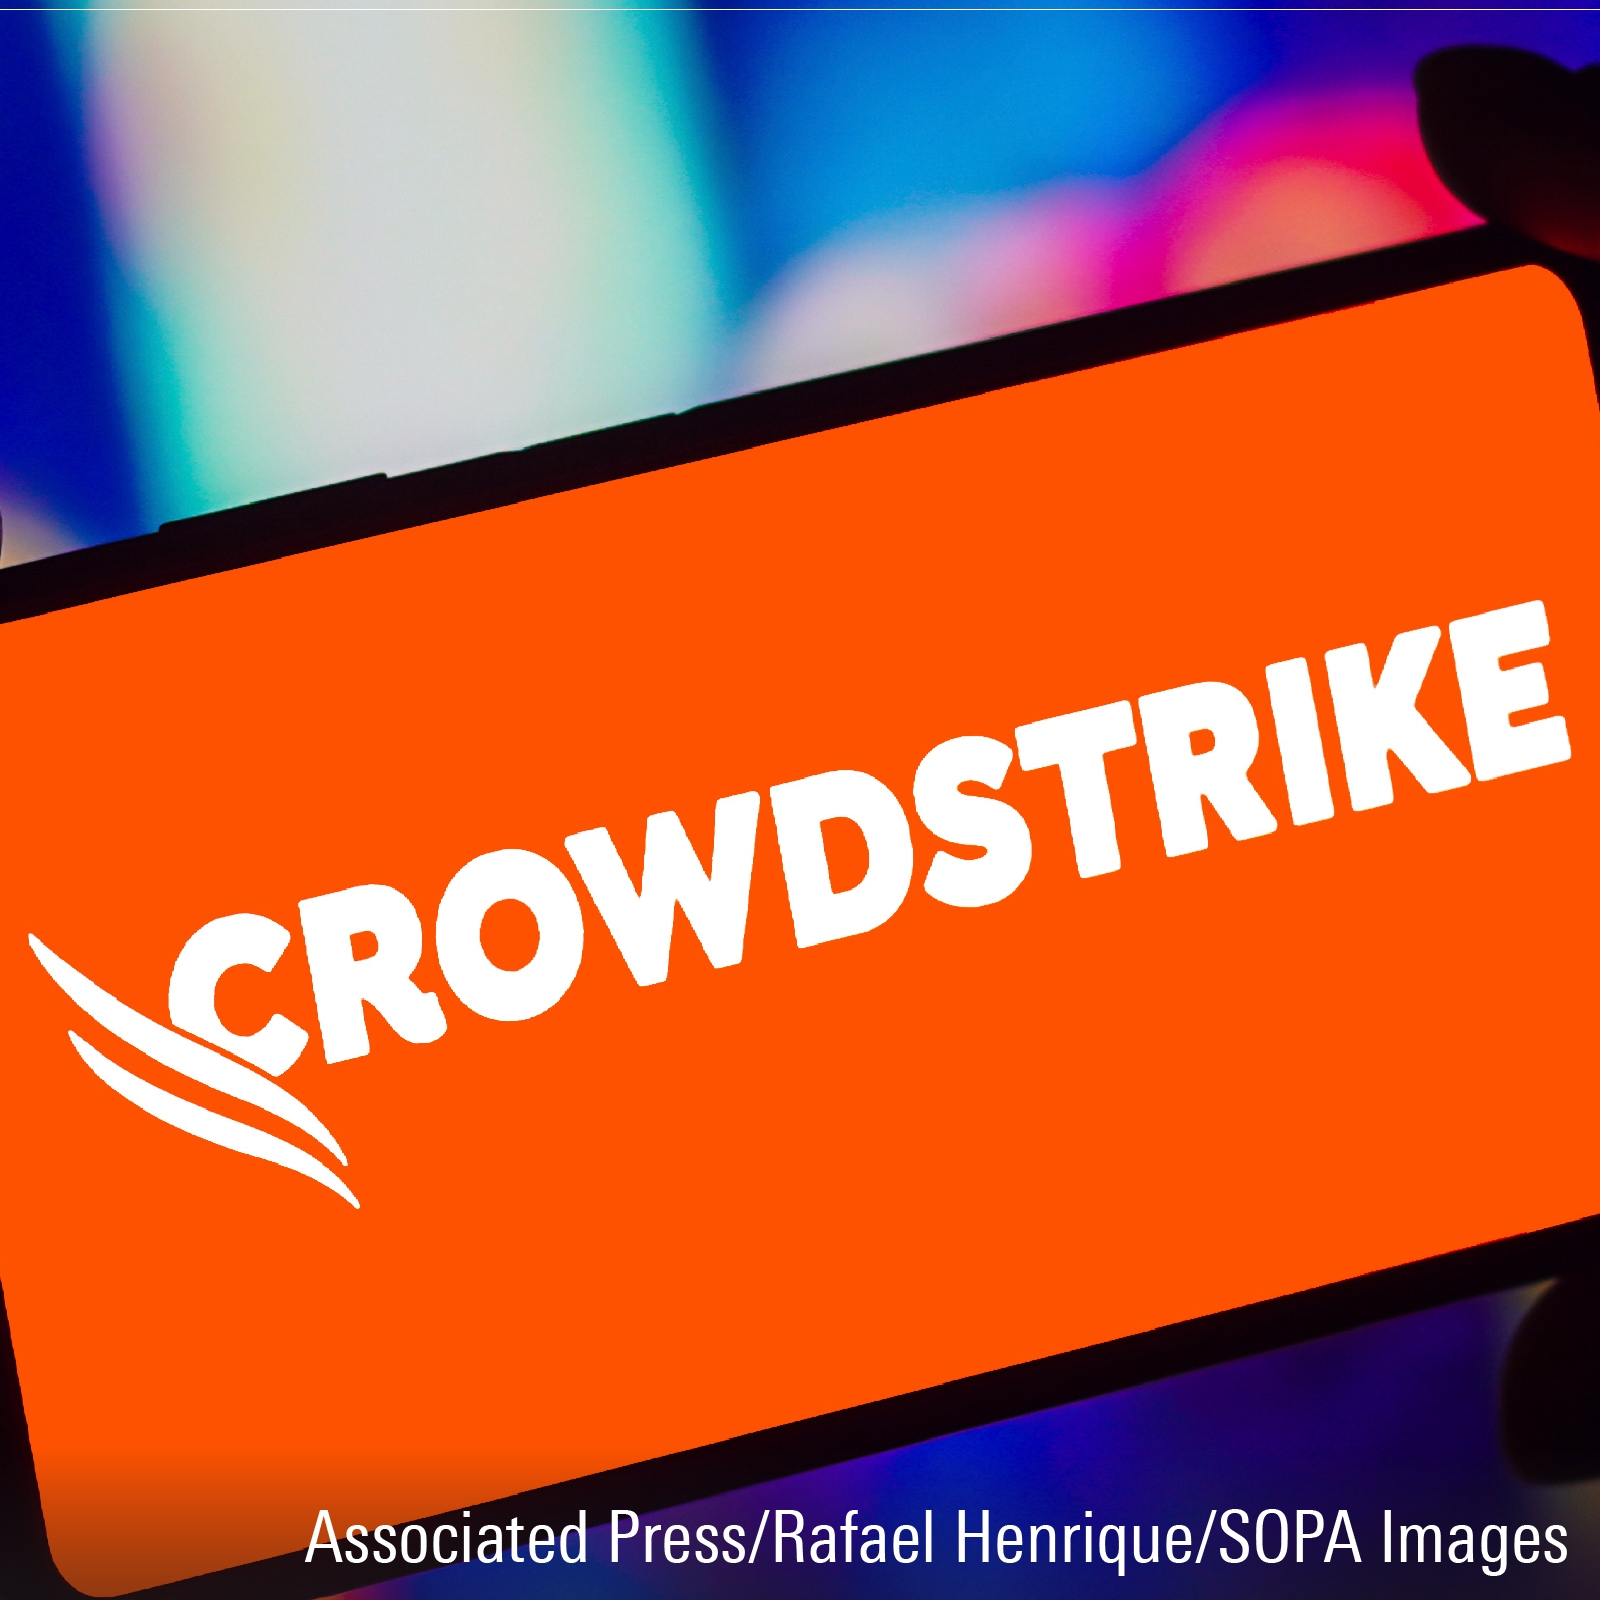 CrowdStrike: We Don’t Share Market’s View, Firm Remains High-Quality